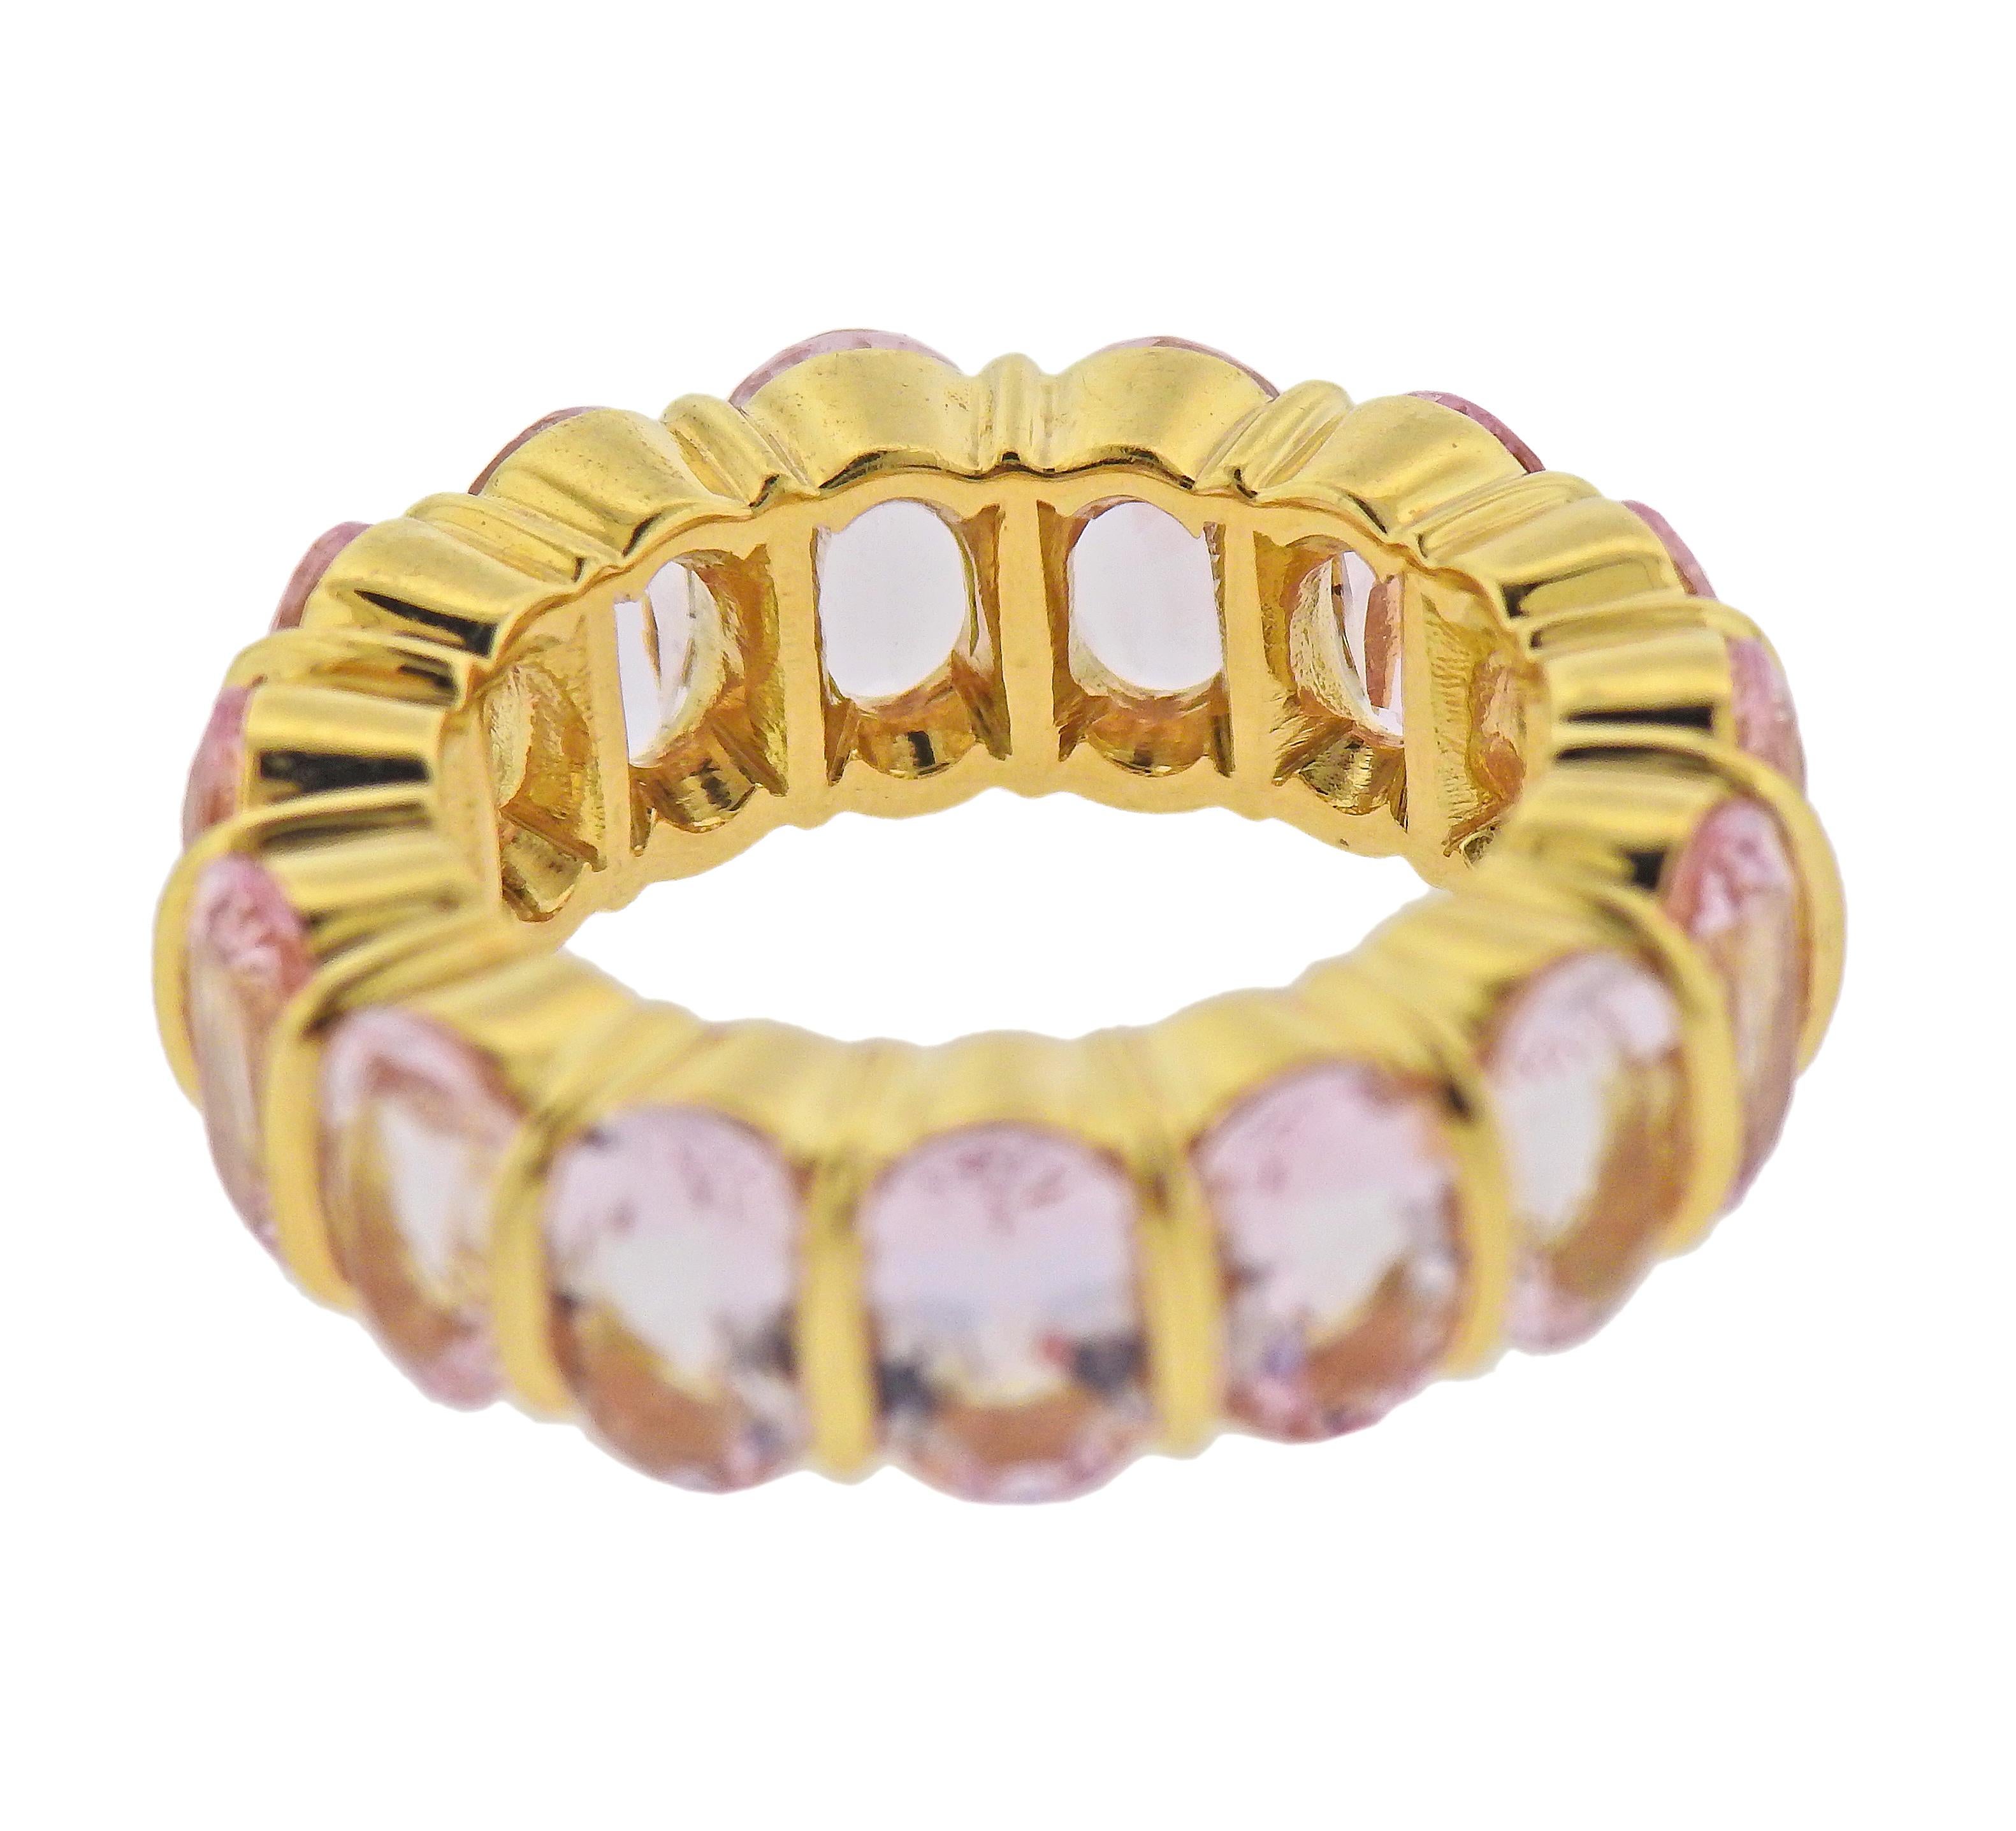 18k gold wedding band ring by Gemlok, set with a full circle of oval kunzite gemstones , measuring approx. 7 x 4.8mm. Ring size - 7, ring is 7mm wide. Marked: 750, Gemlok. Weight - 14.1 grams. 